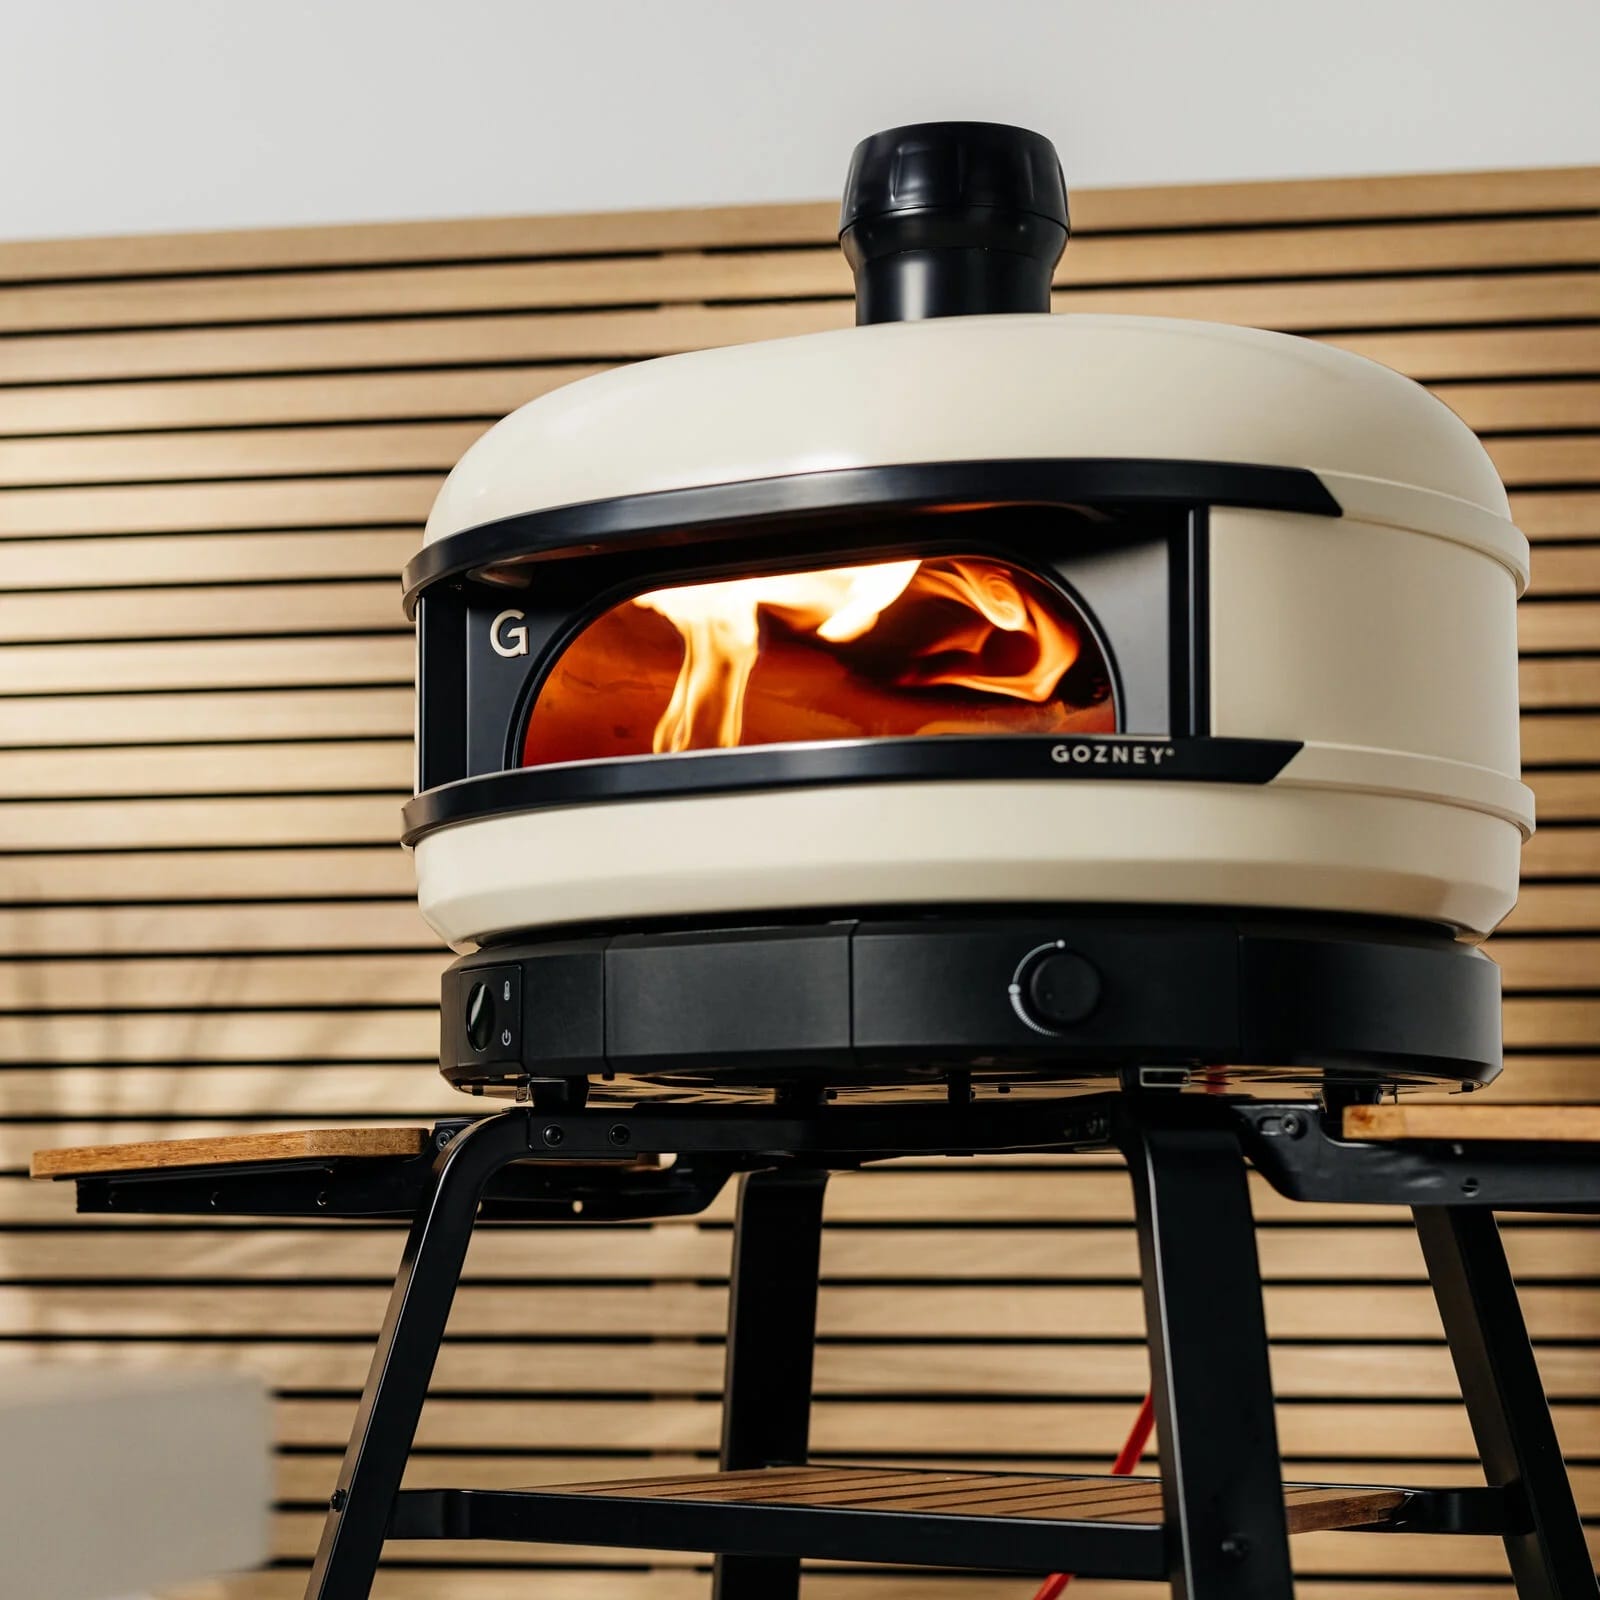 https://www.cookoutnews.com/wp-content/uploads/2023/10/Gozney-Dome-S1-Pizza-Oven-on-a-Stand.jpg